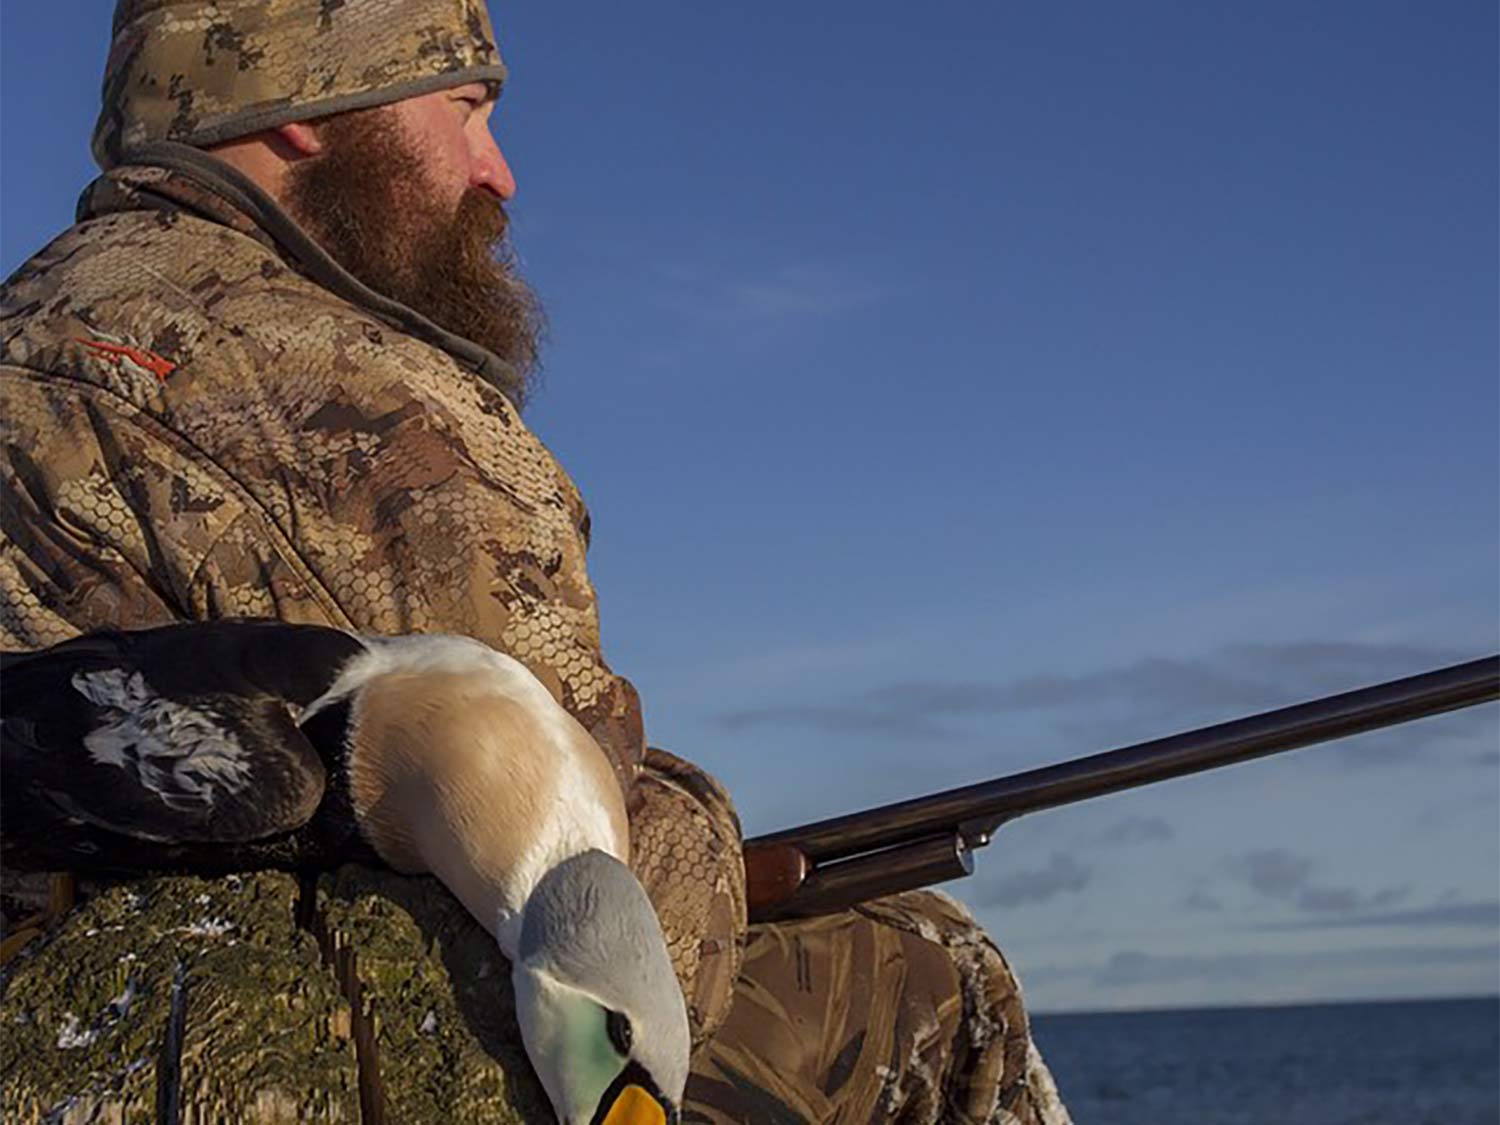 A hunter sits with a shotgun on his lap next to a duck.